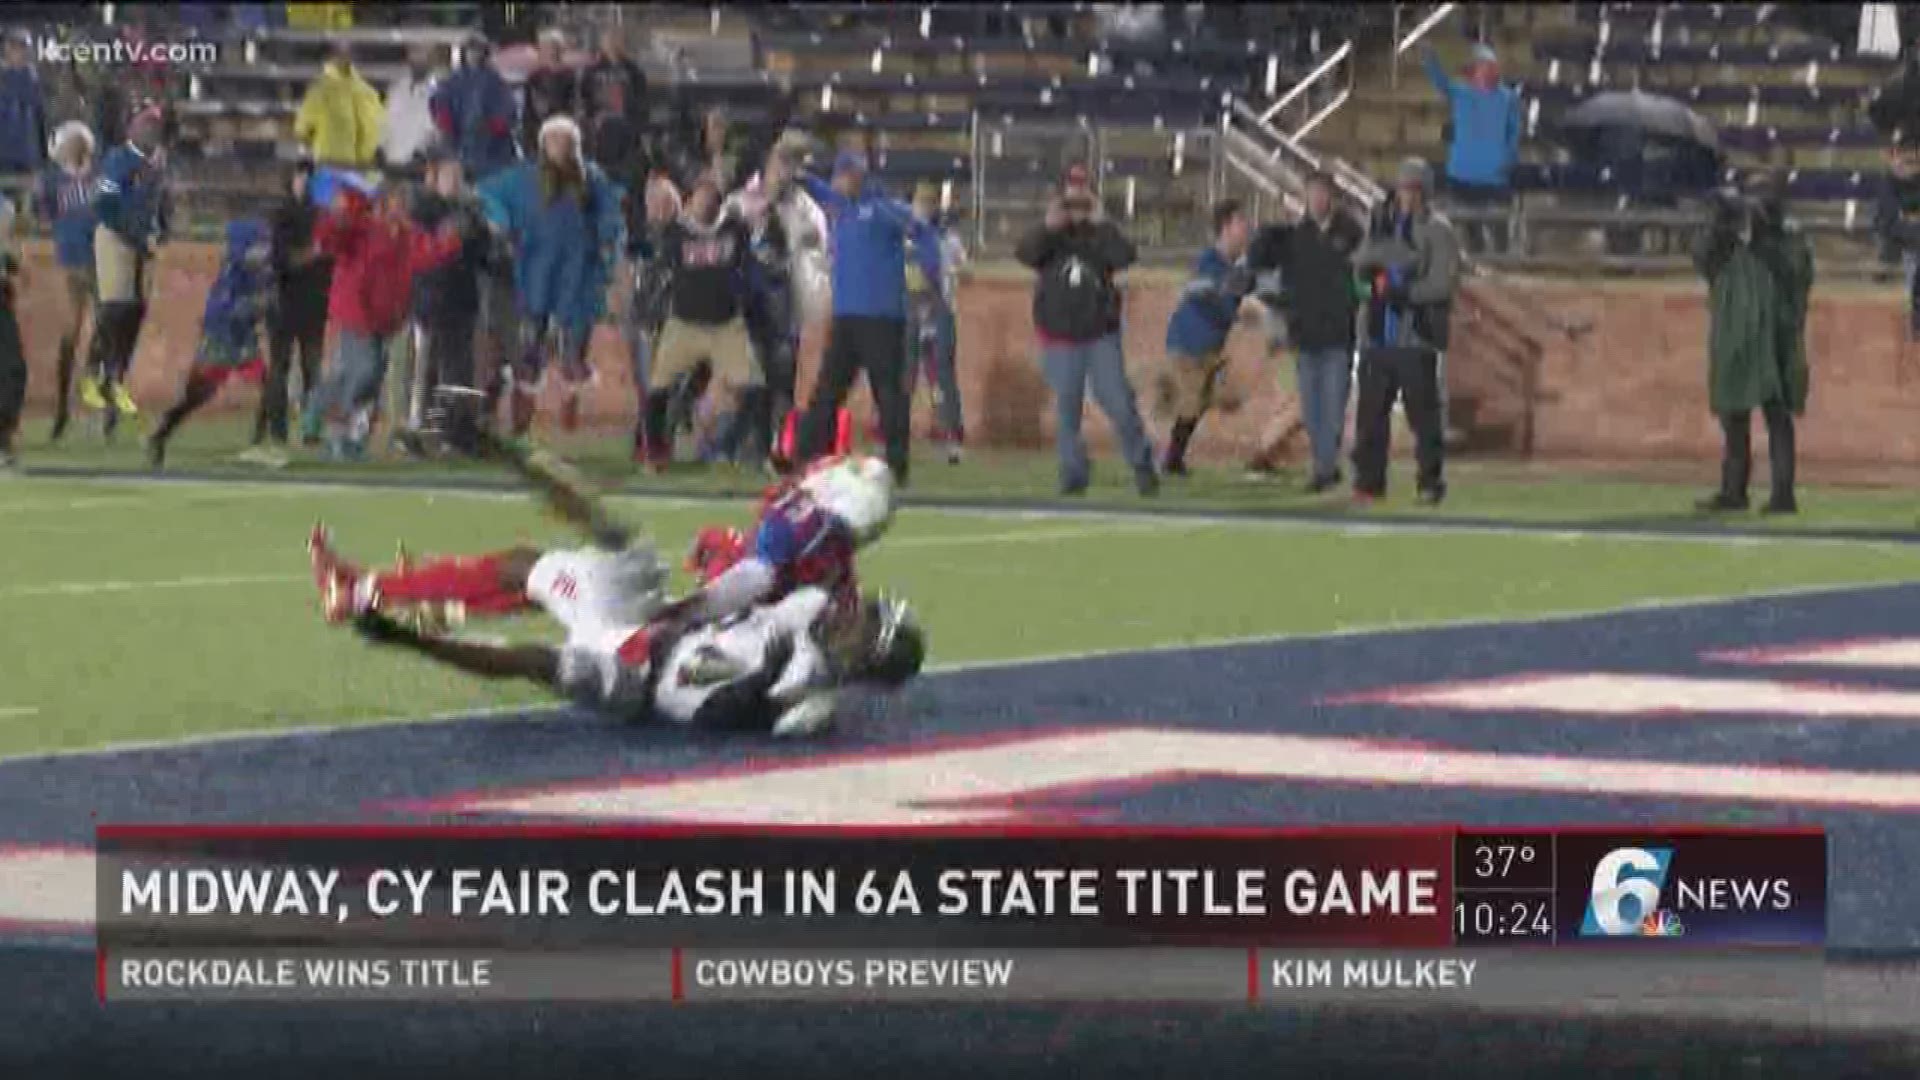 Midway and Cy Fair are set to clash in 6A state title game.